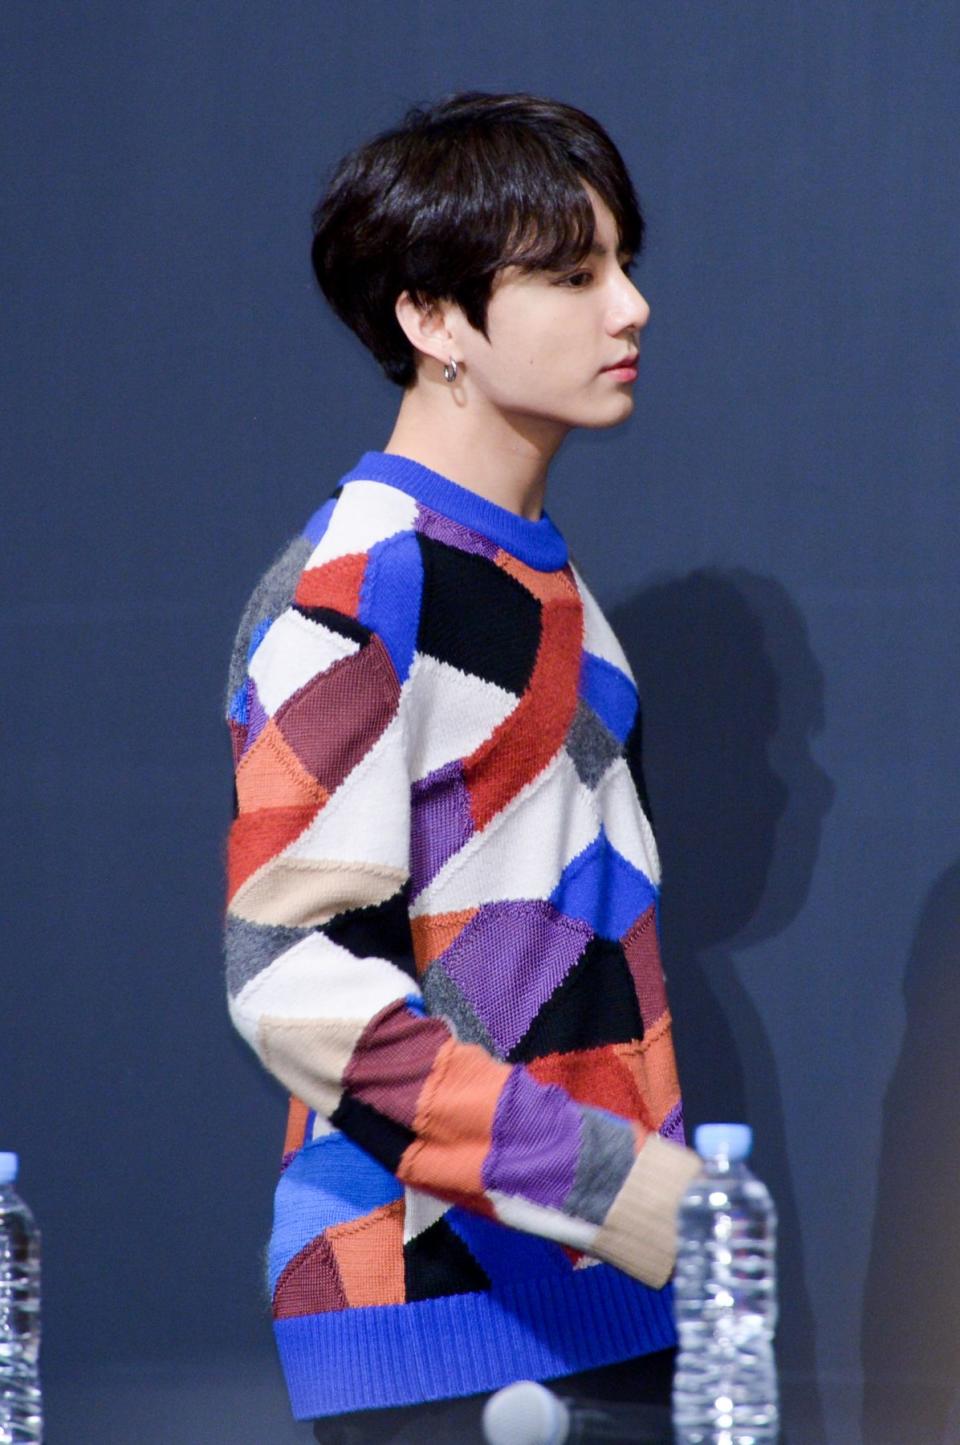 SEOUL, SOUTH KOREA - MAY 24: Jungkook of BTS attends press conference for the BTS's Third Album 'LOVE YOURSELF : Tear' Release at Lotte Hotel Seoul on May 24, 2018 in Seoul, South Korea. (Photo by THE FACT/Imazins via Getty Images)